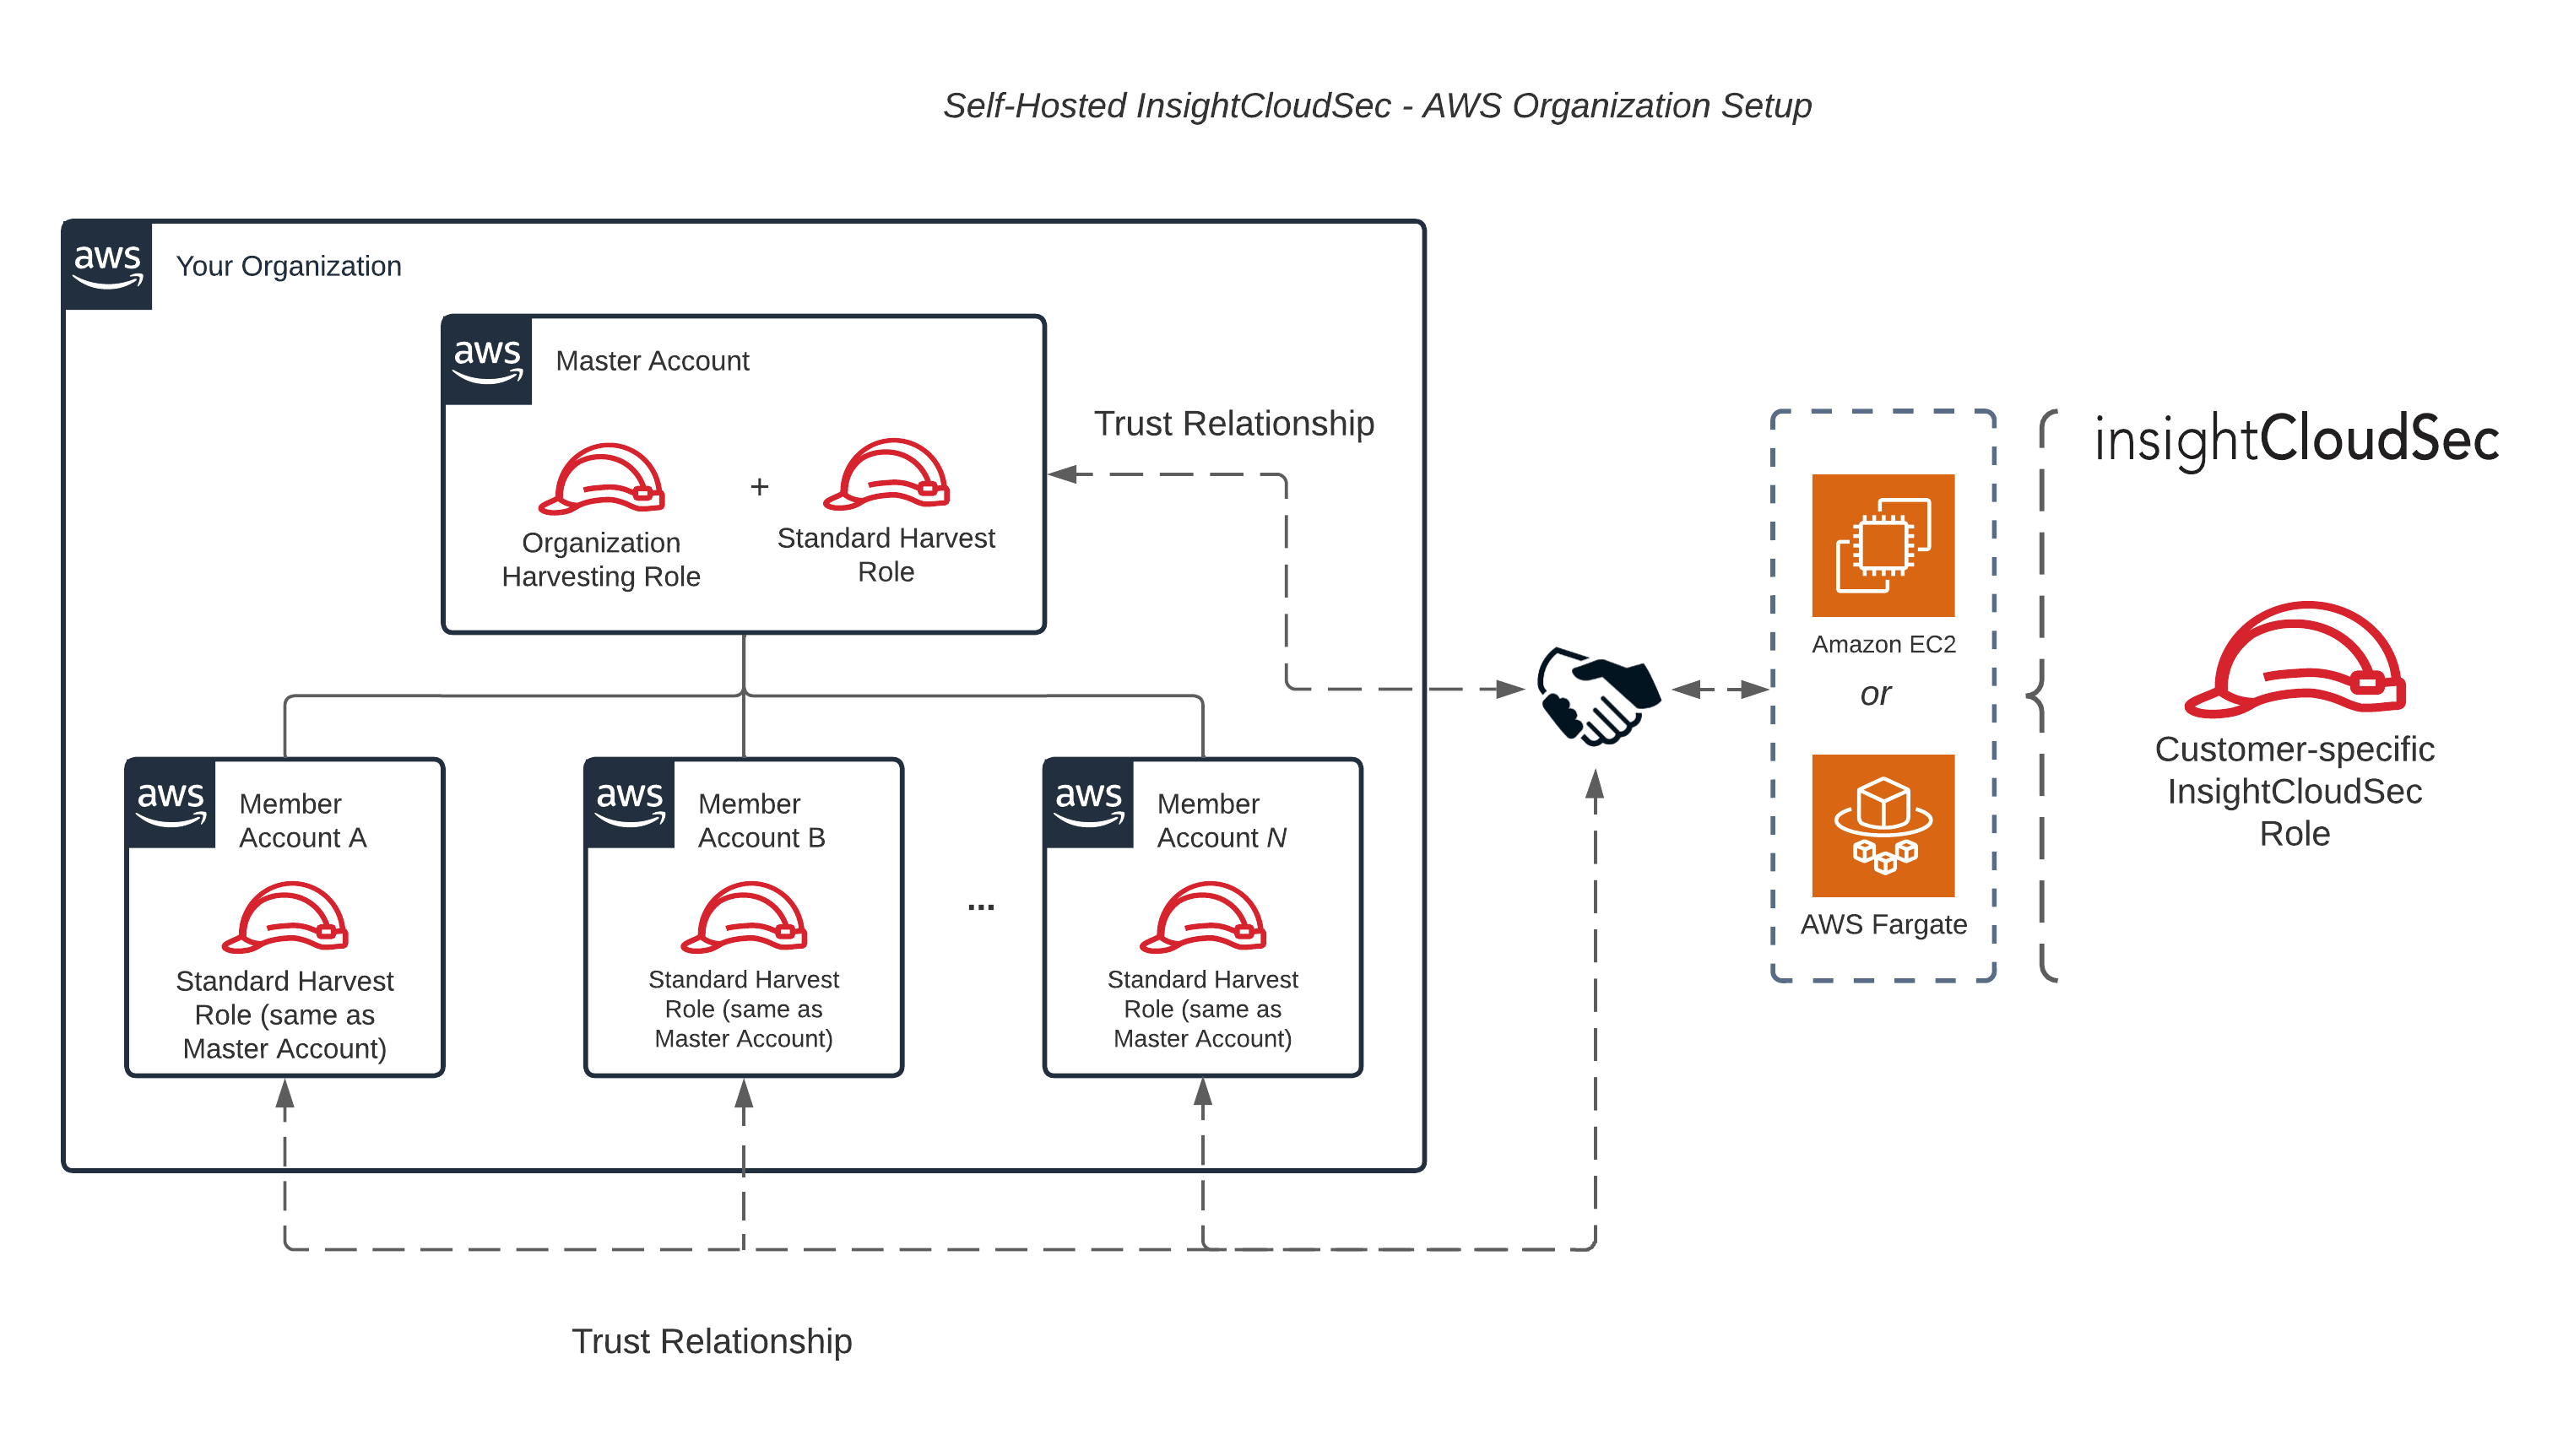 AWS Organizations Setup Overview for Self-Hosted versions of InsightCloudSec